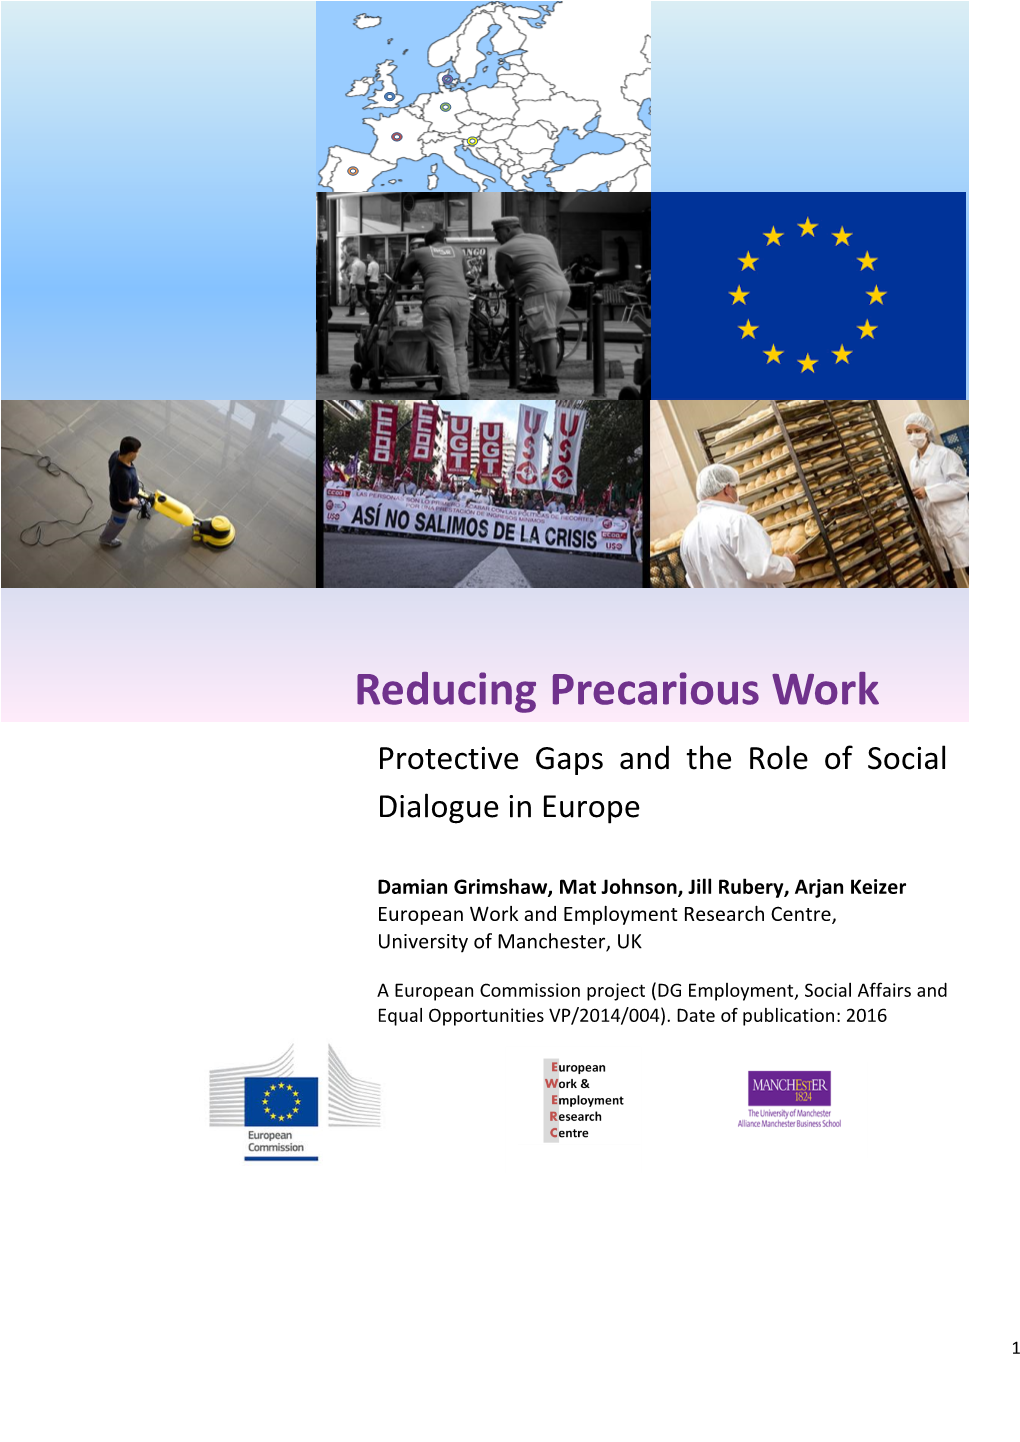 Reducing Precarious Work Protective Gaps and the Role of Social Dialogue in Europe